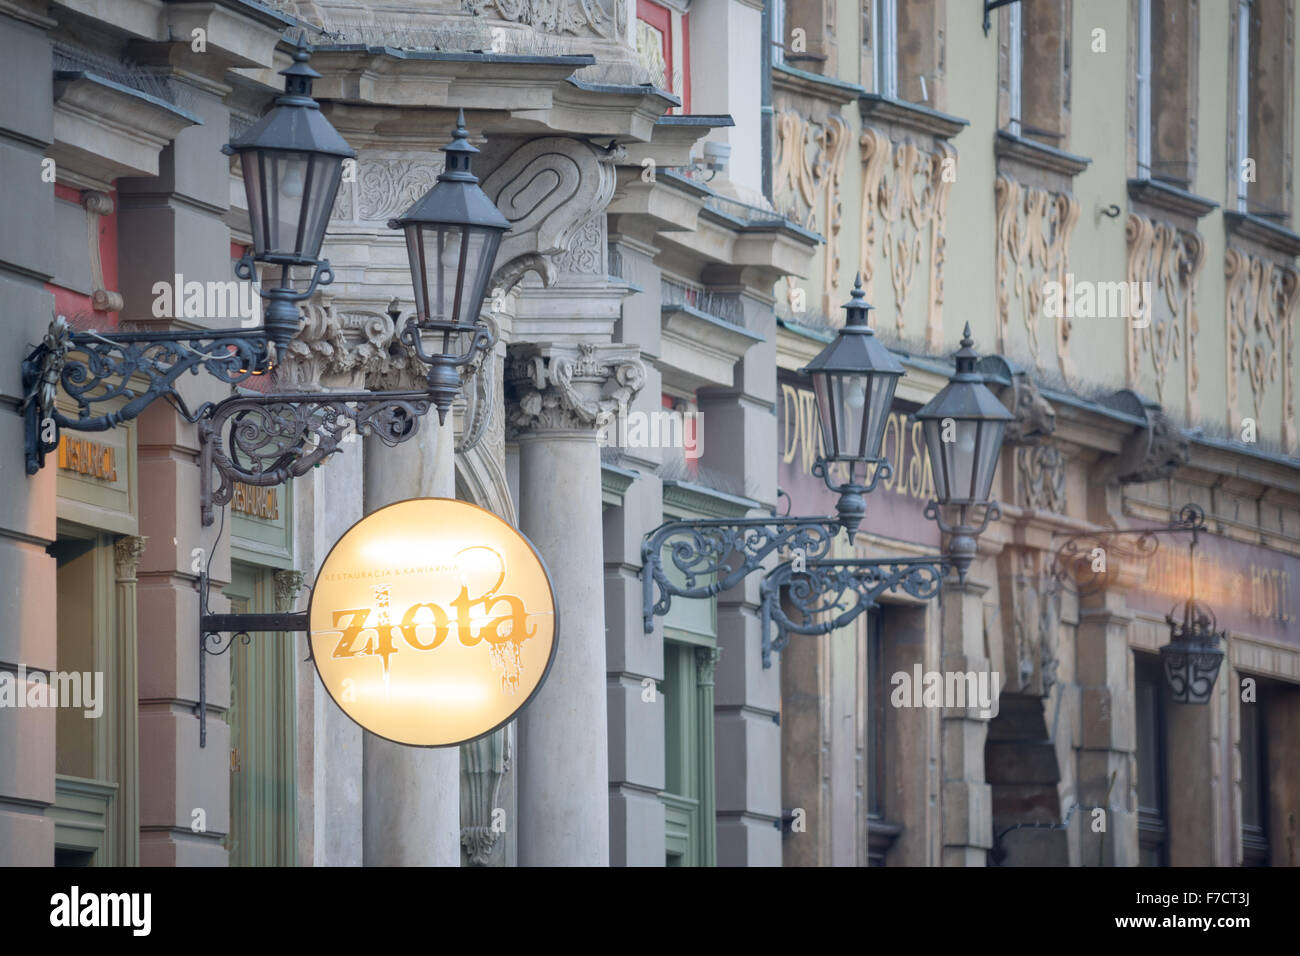 Street lamps and signs on the walls of houses Old market Wroclaw Stock Photo